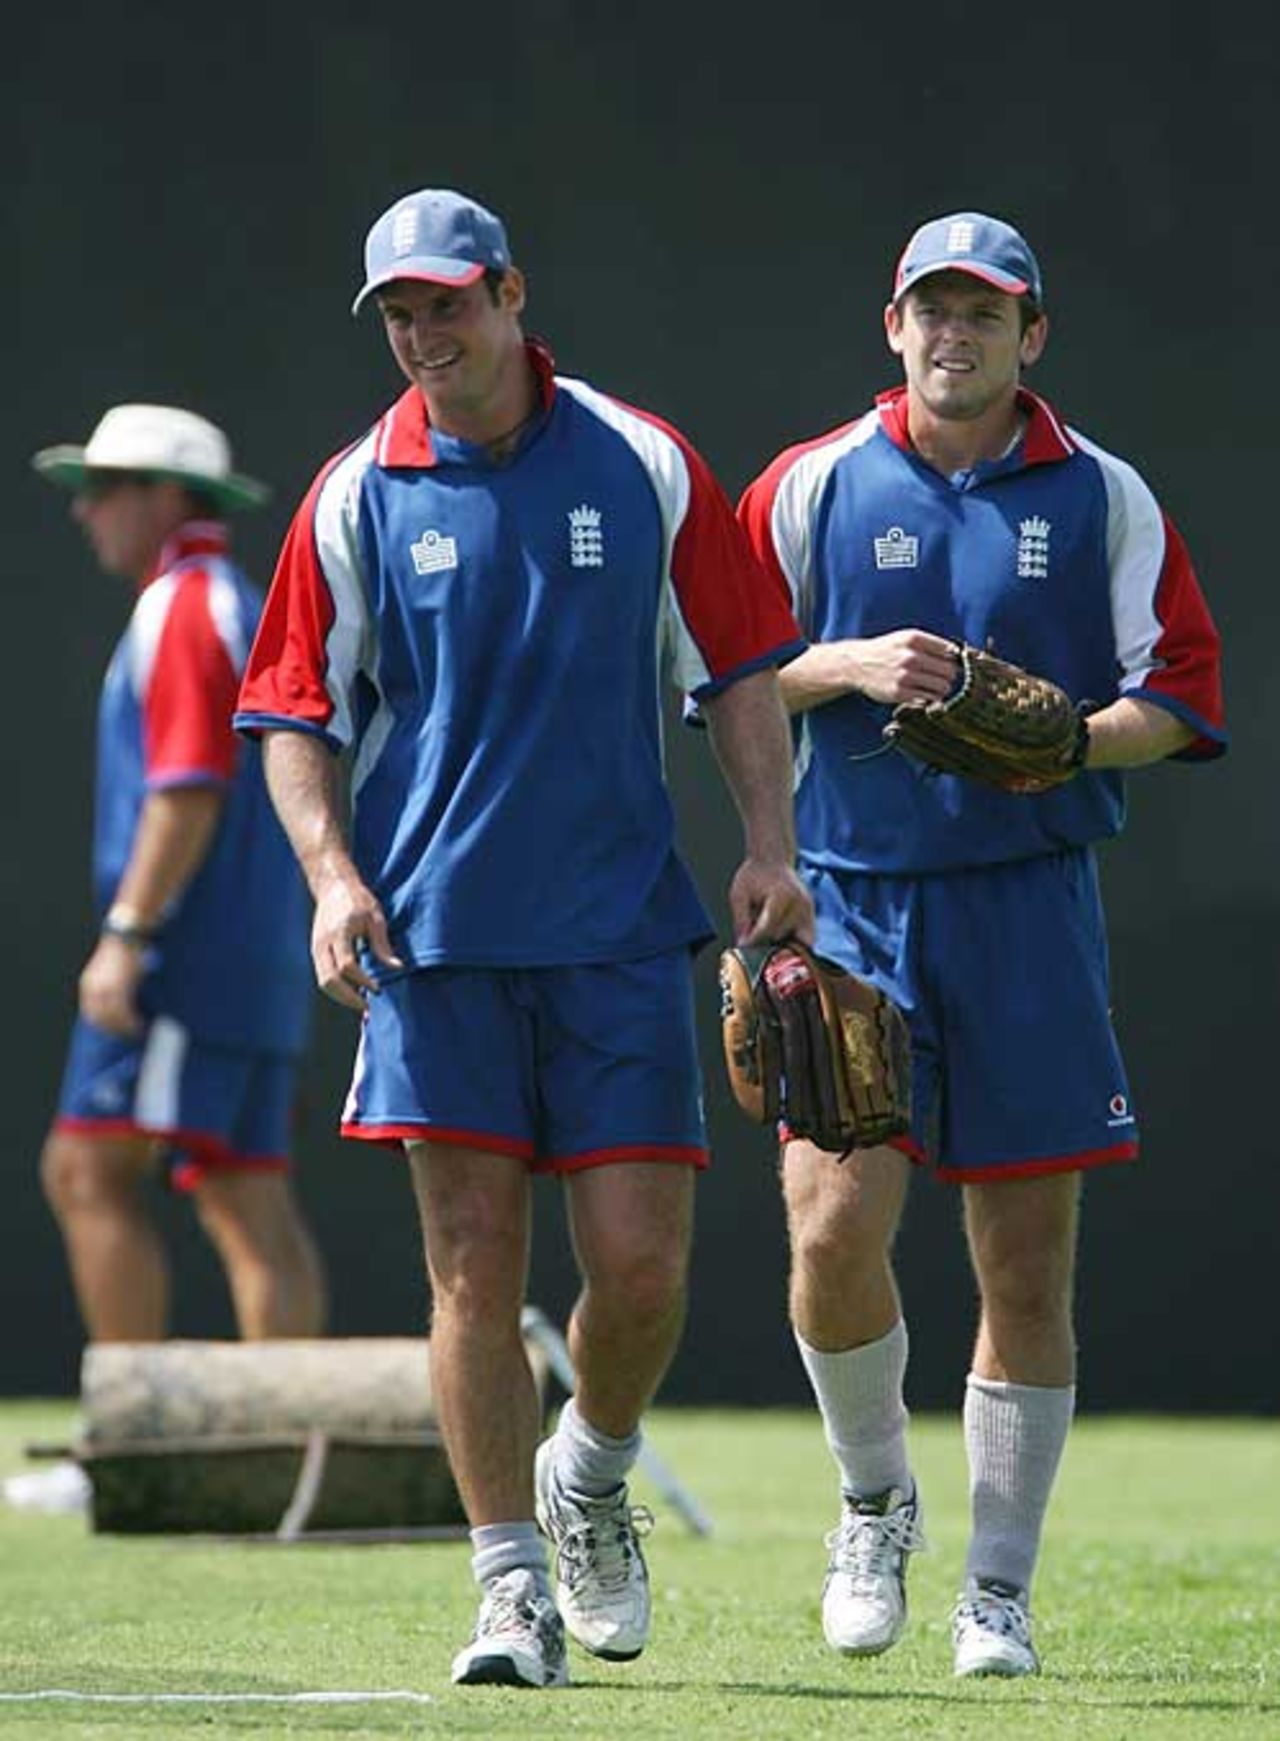 Andrew Strauss and Ed Joyce consider a change of sports, Antigua, April 2, 2007